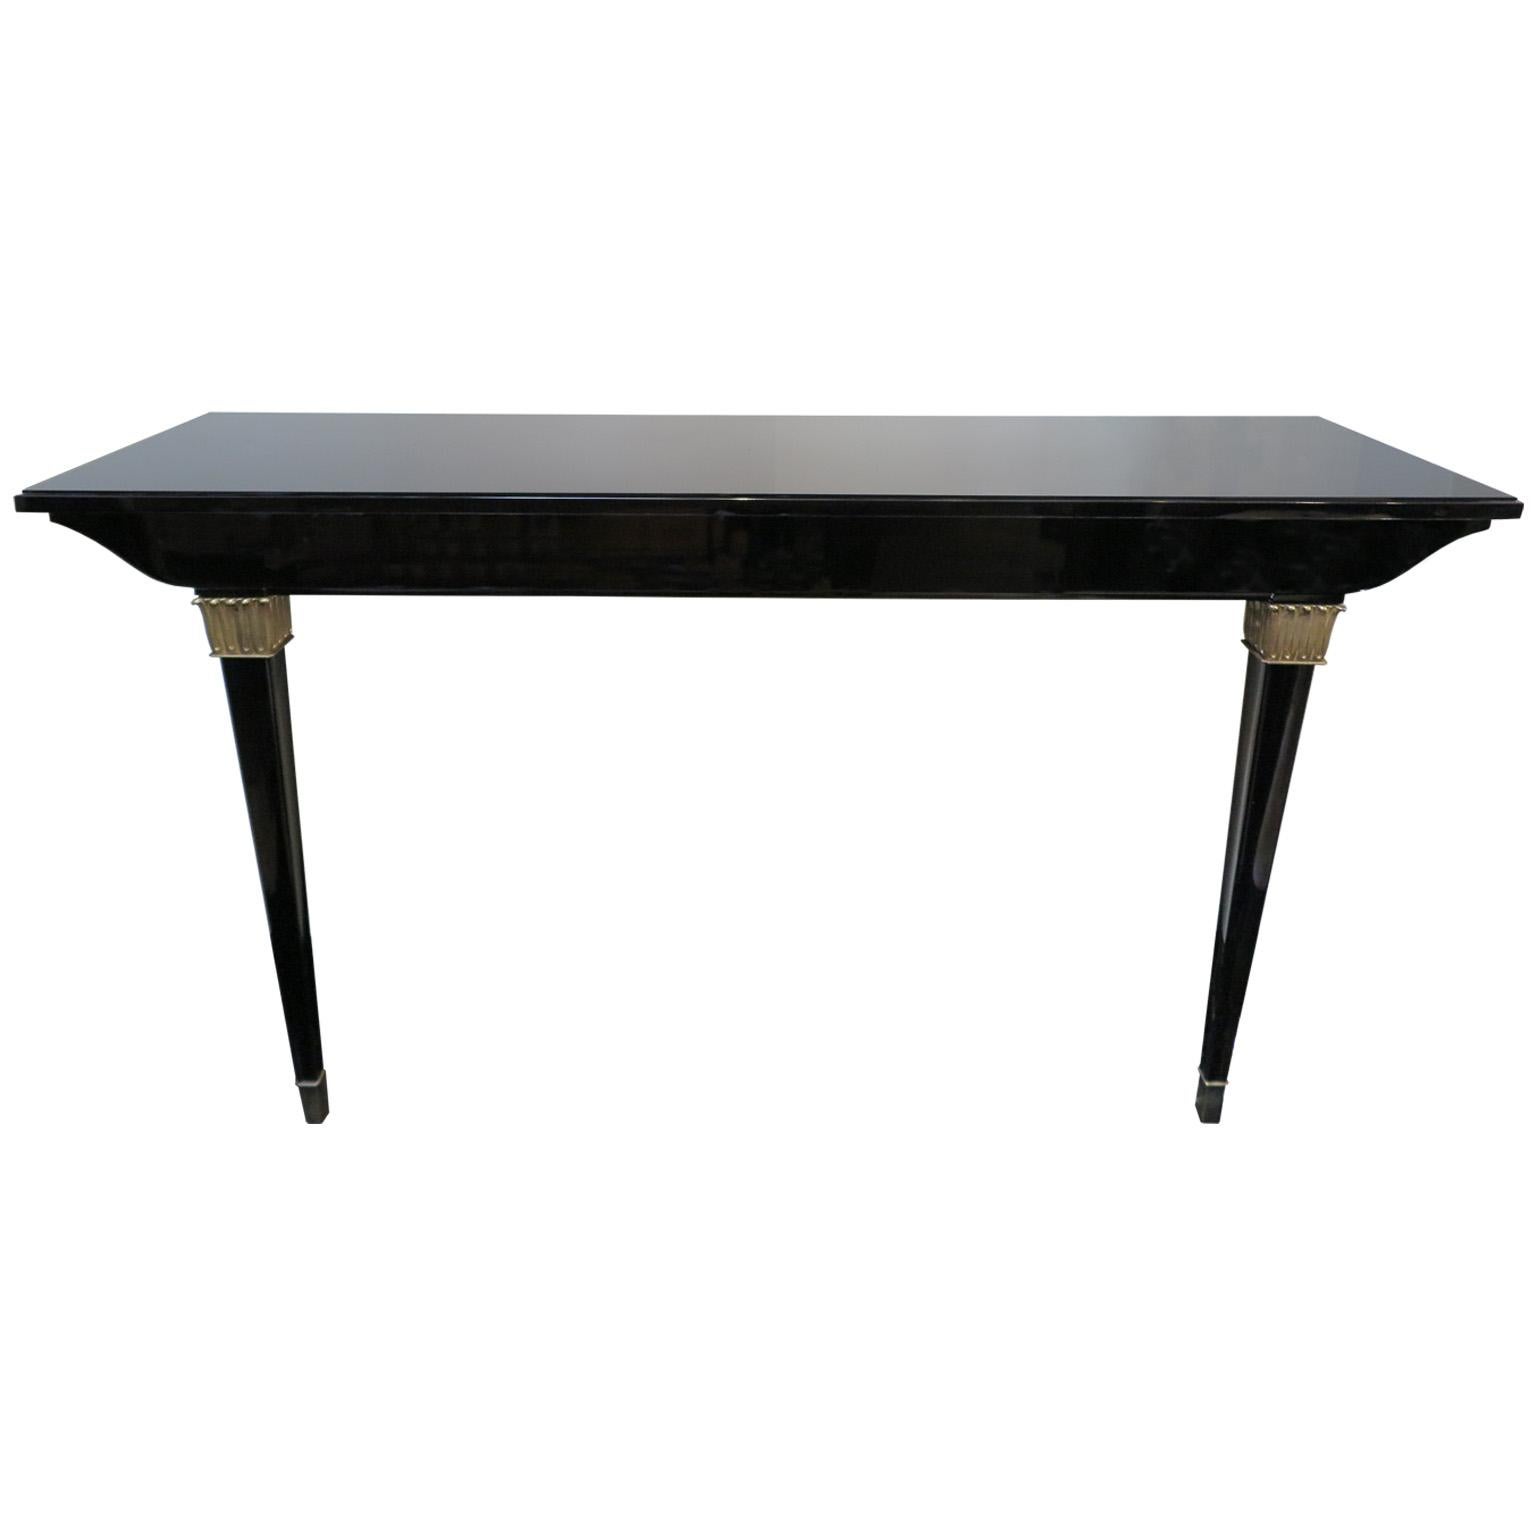 Pair of French Art Deco wall mounted consoles with black lacquer frame in a gloss finish. The two front legs feature two square brass relief accents with stylized leaves. The thick apron top showcases curved sides. A black glass sits onto of the